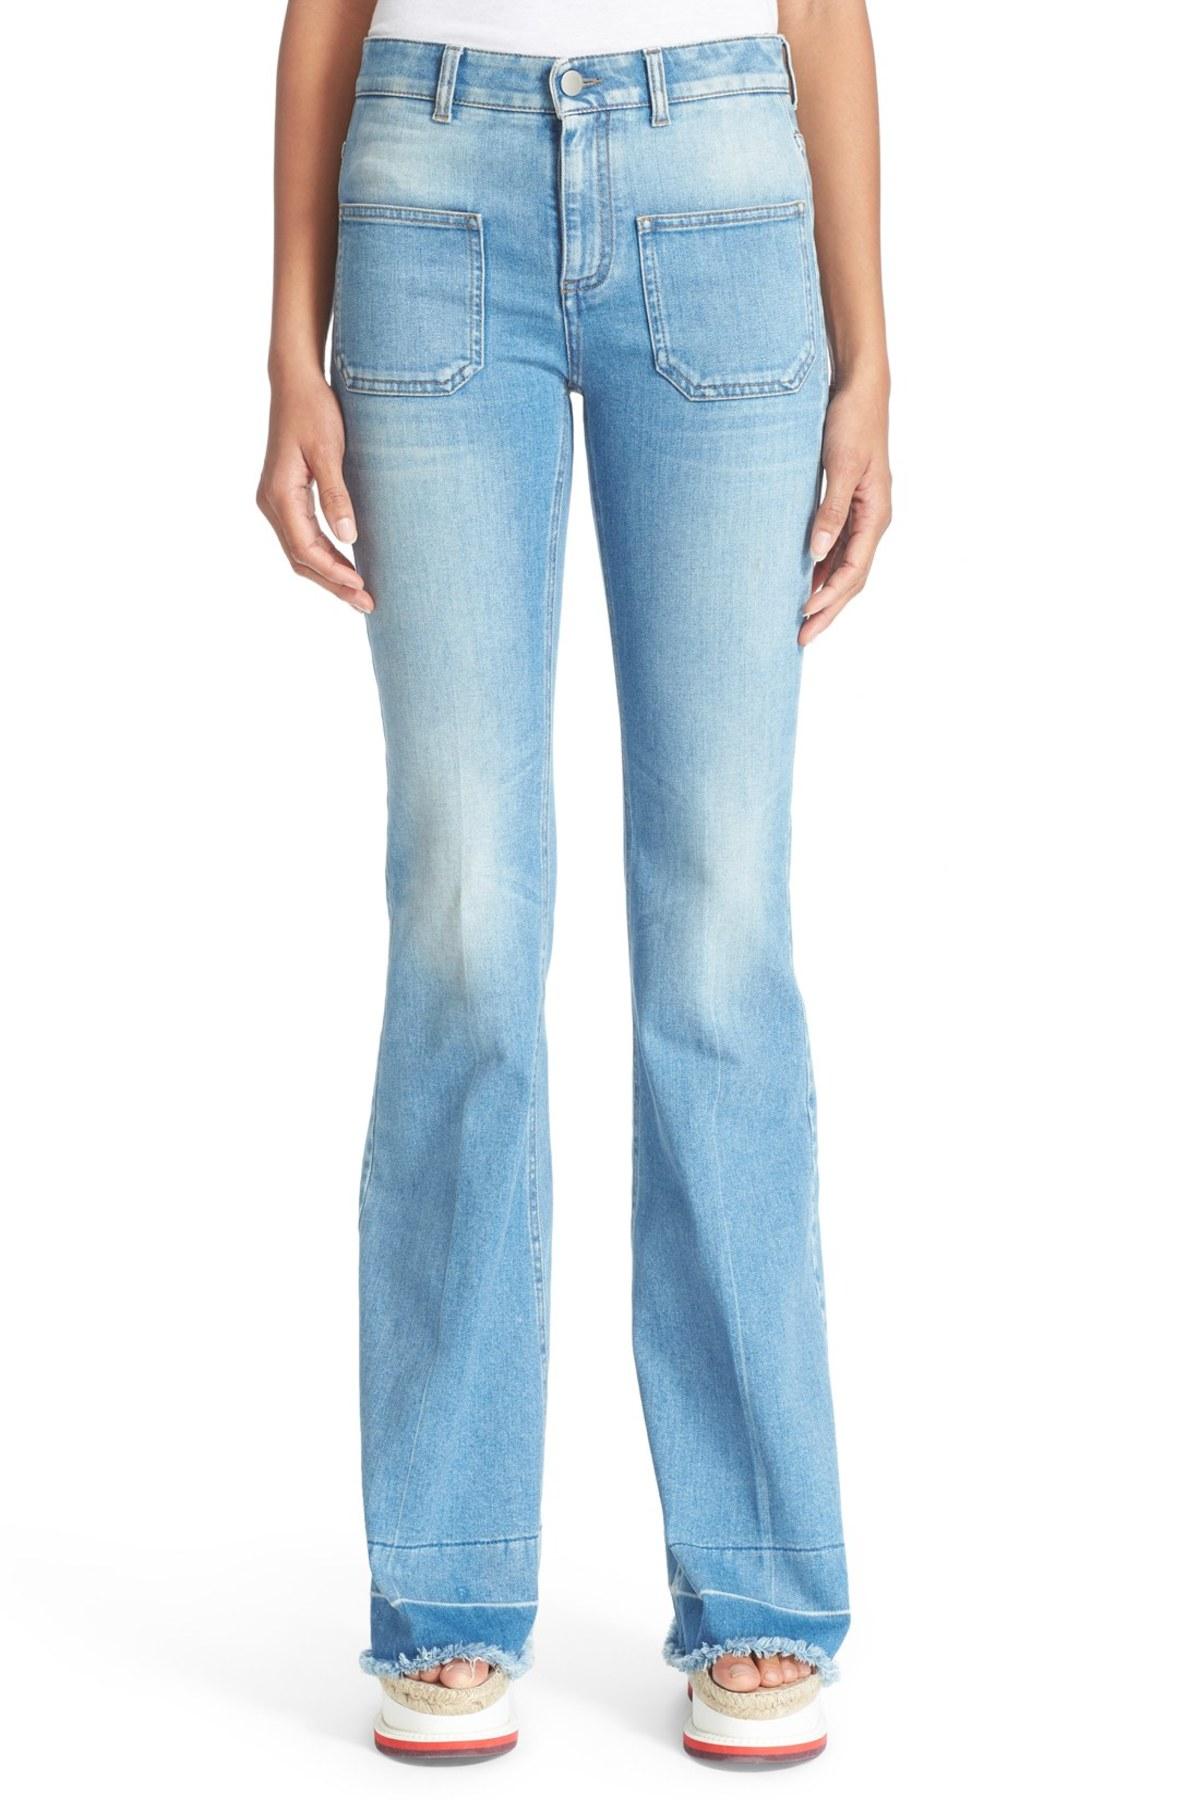 Lyst - Stella Mccartney 'the '70s Flare' Patch Pocket Jeans in Blue